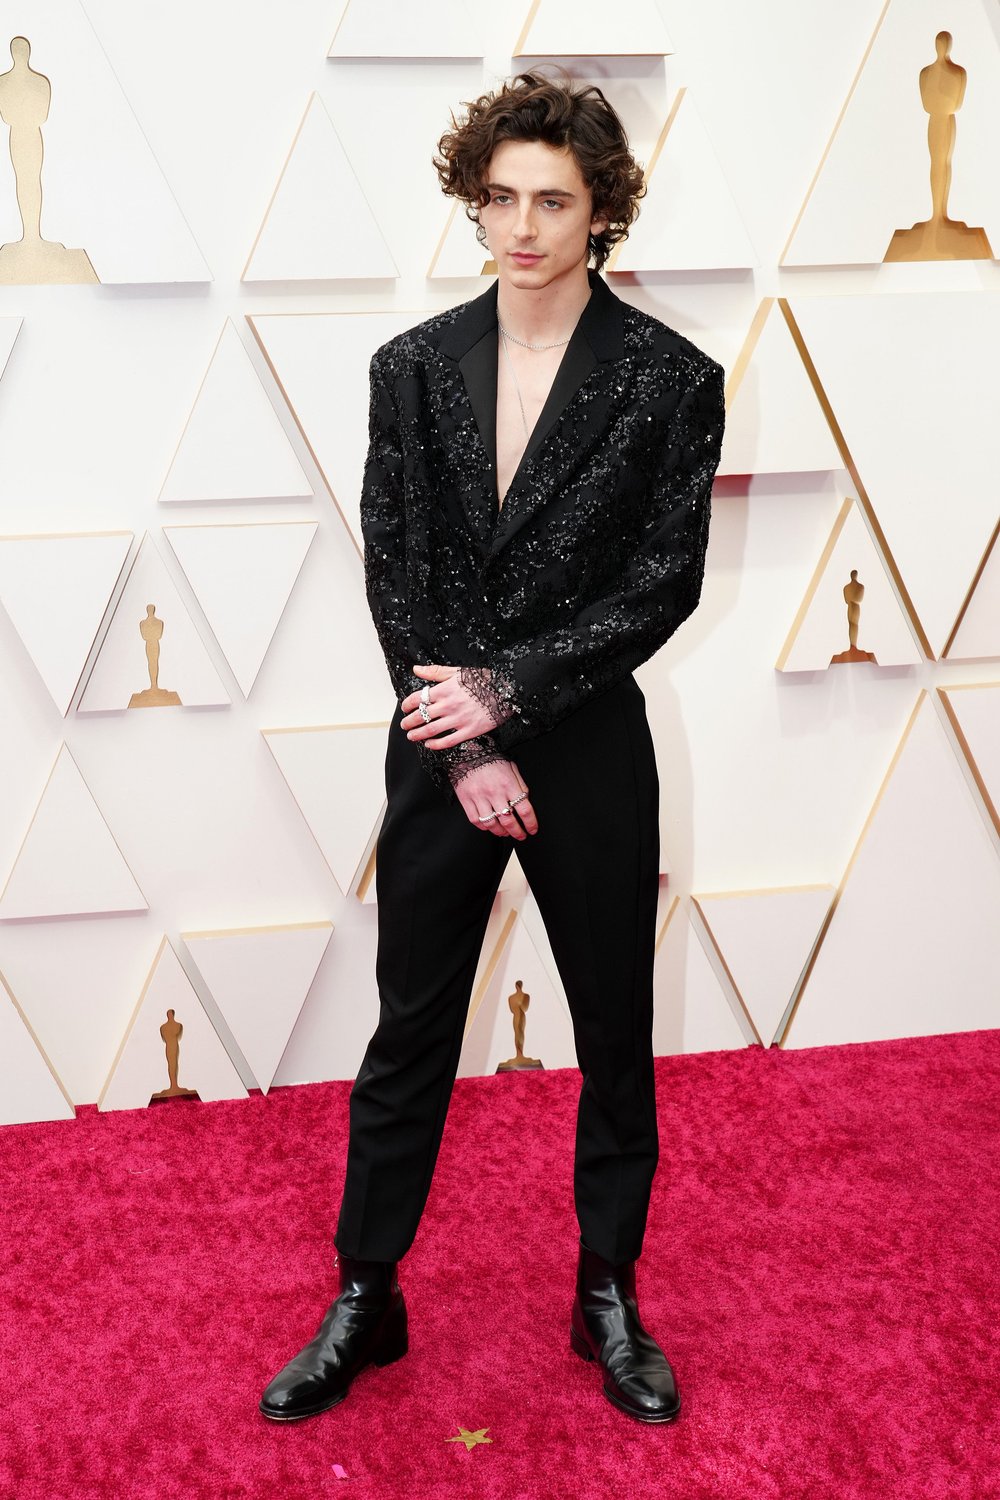 timoth-c3-a9e-chalamet-attends-the-94th-annual-academy-awards-at-news-photo-1648422452.jpg